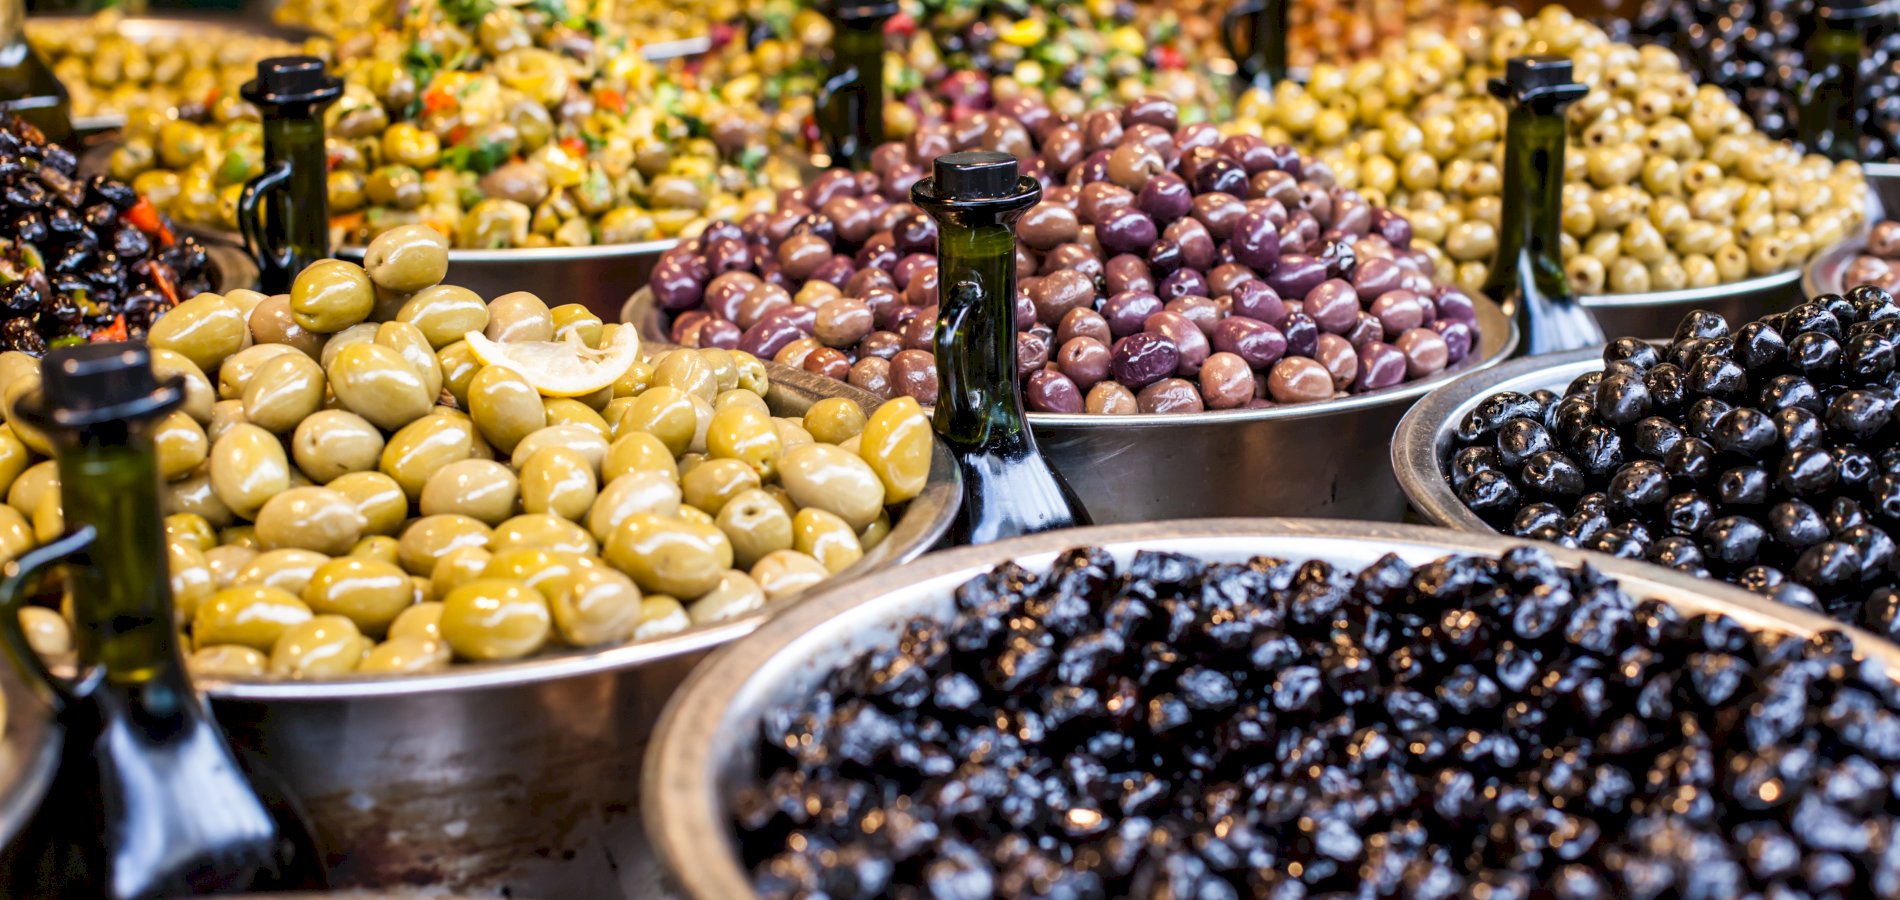 Ophorus Tours - Languedoc Wine Tour & Olive Oil tasting Half Day Trip from Montpellier 